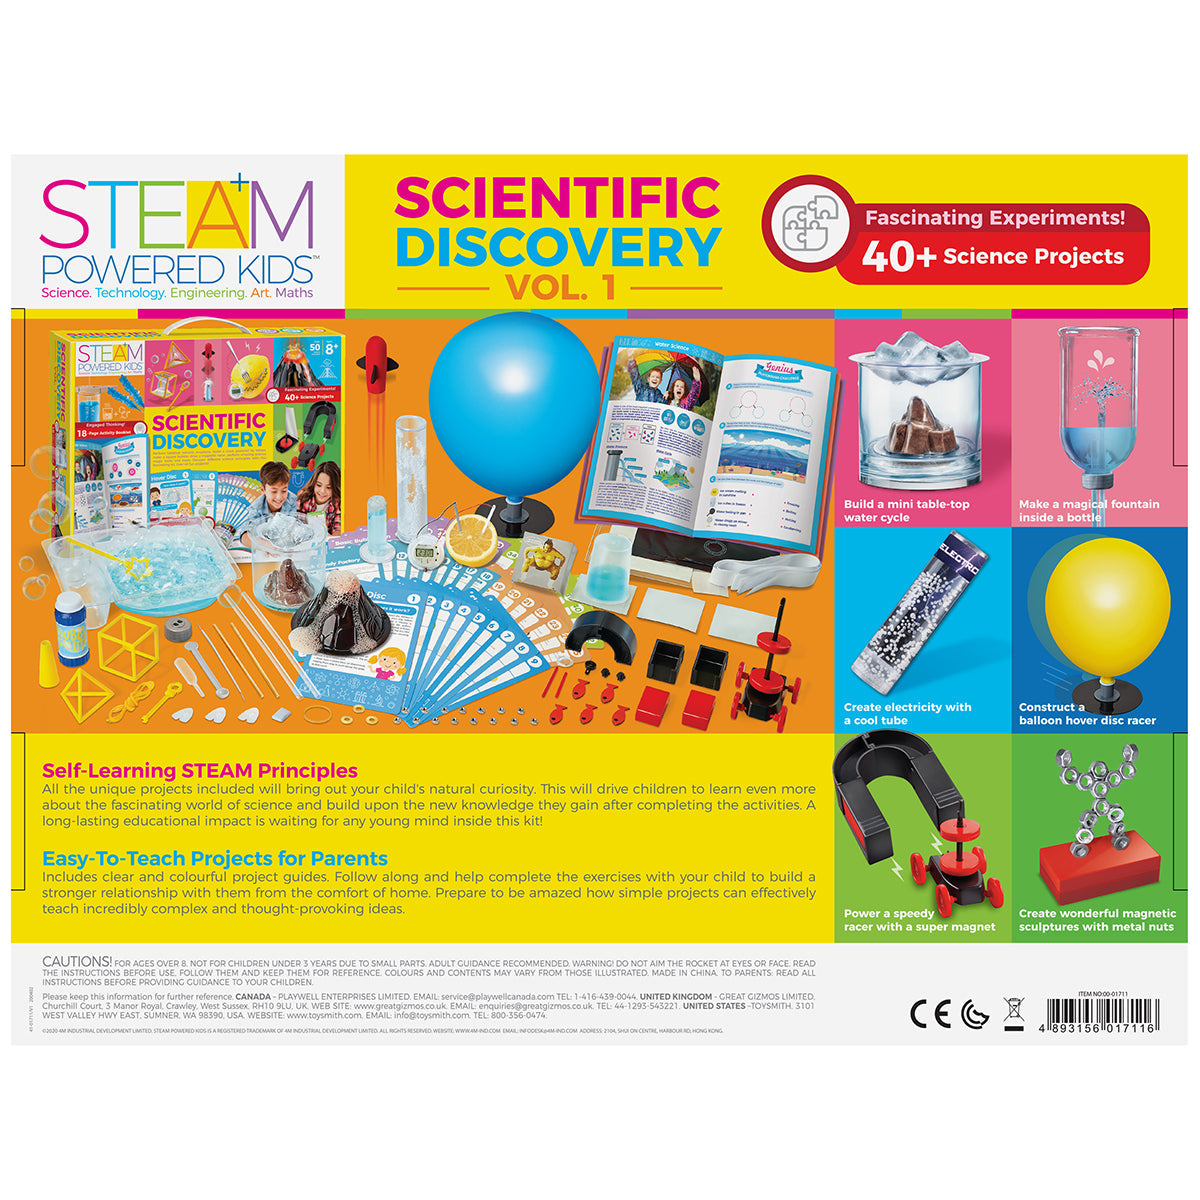 STEAM Powered Kids Scientific Discovery